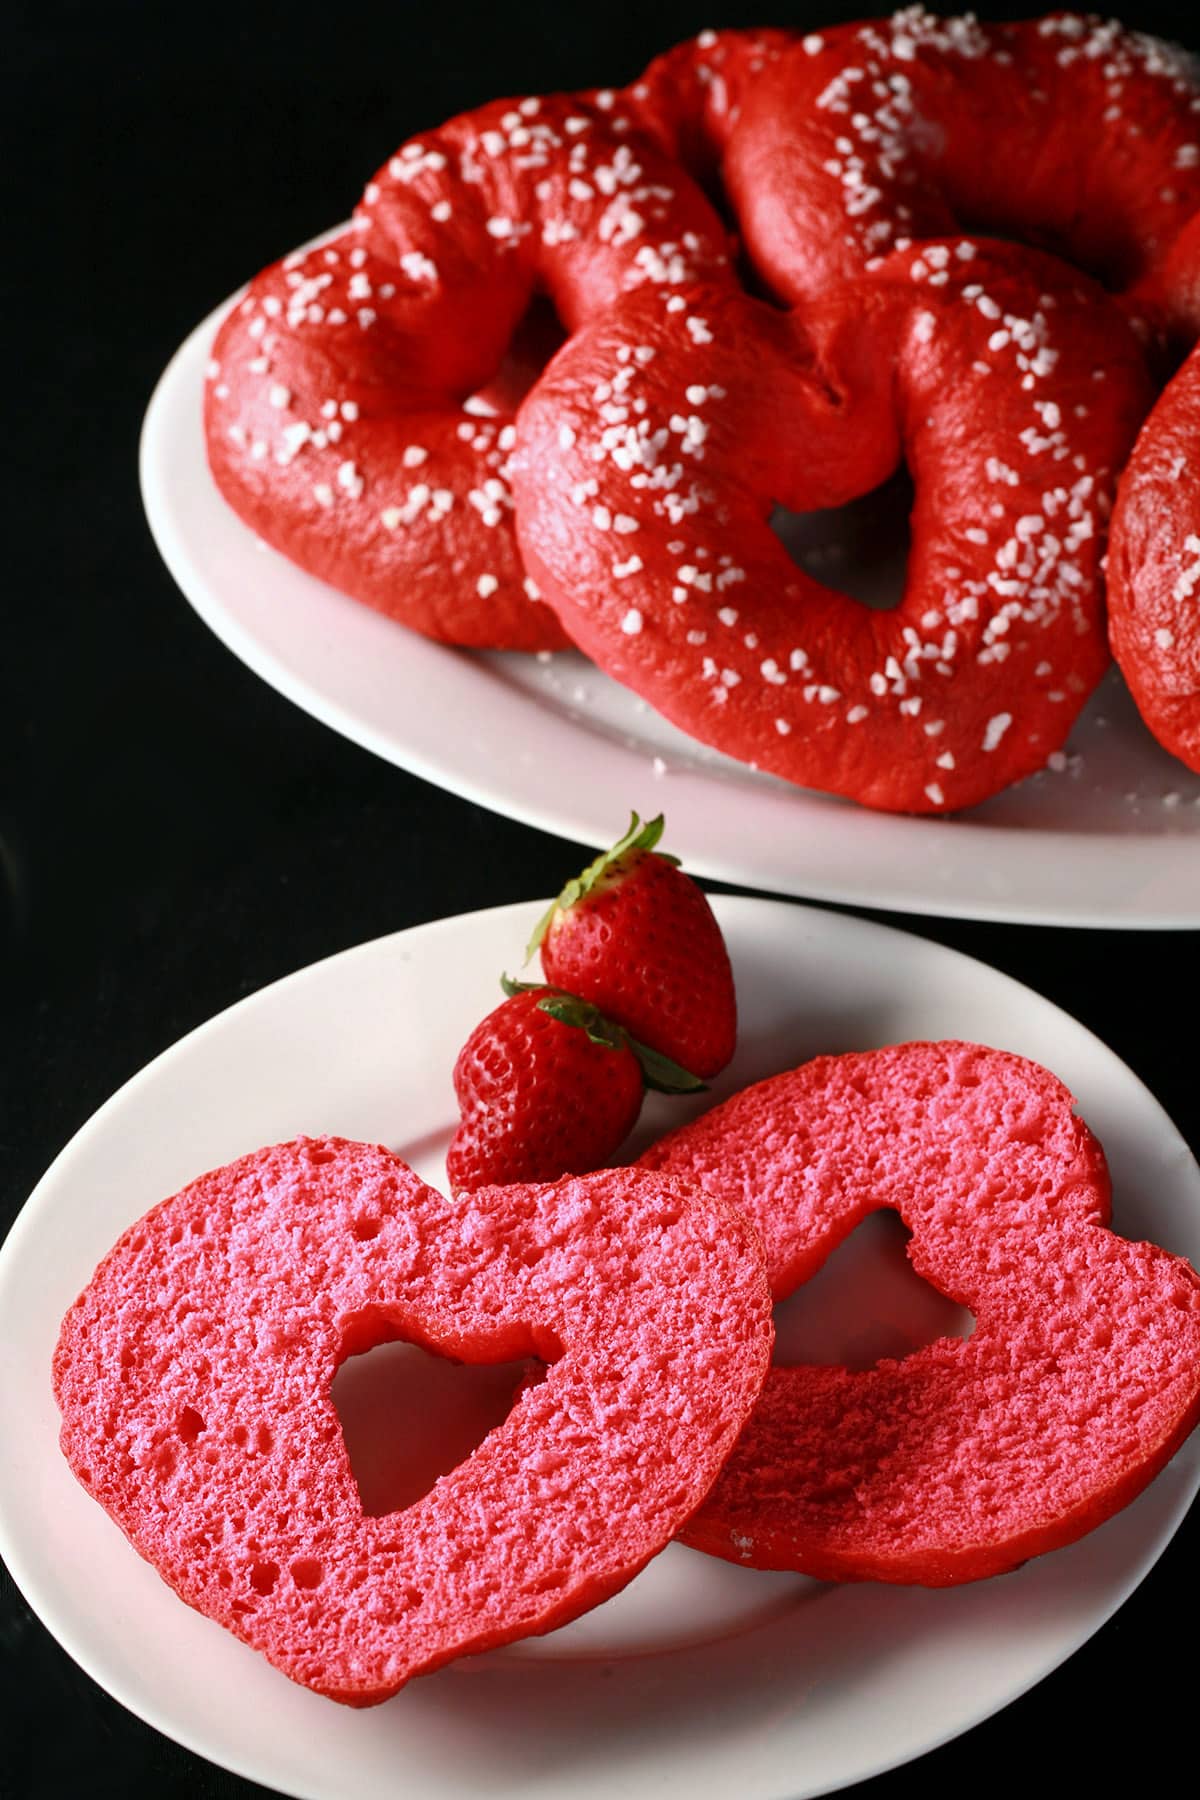 A sliced open pink heart shaped bagel on a plate, with a serving platter of valentine’s day bagels behind it.